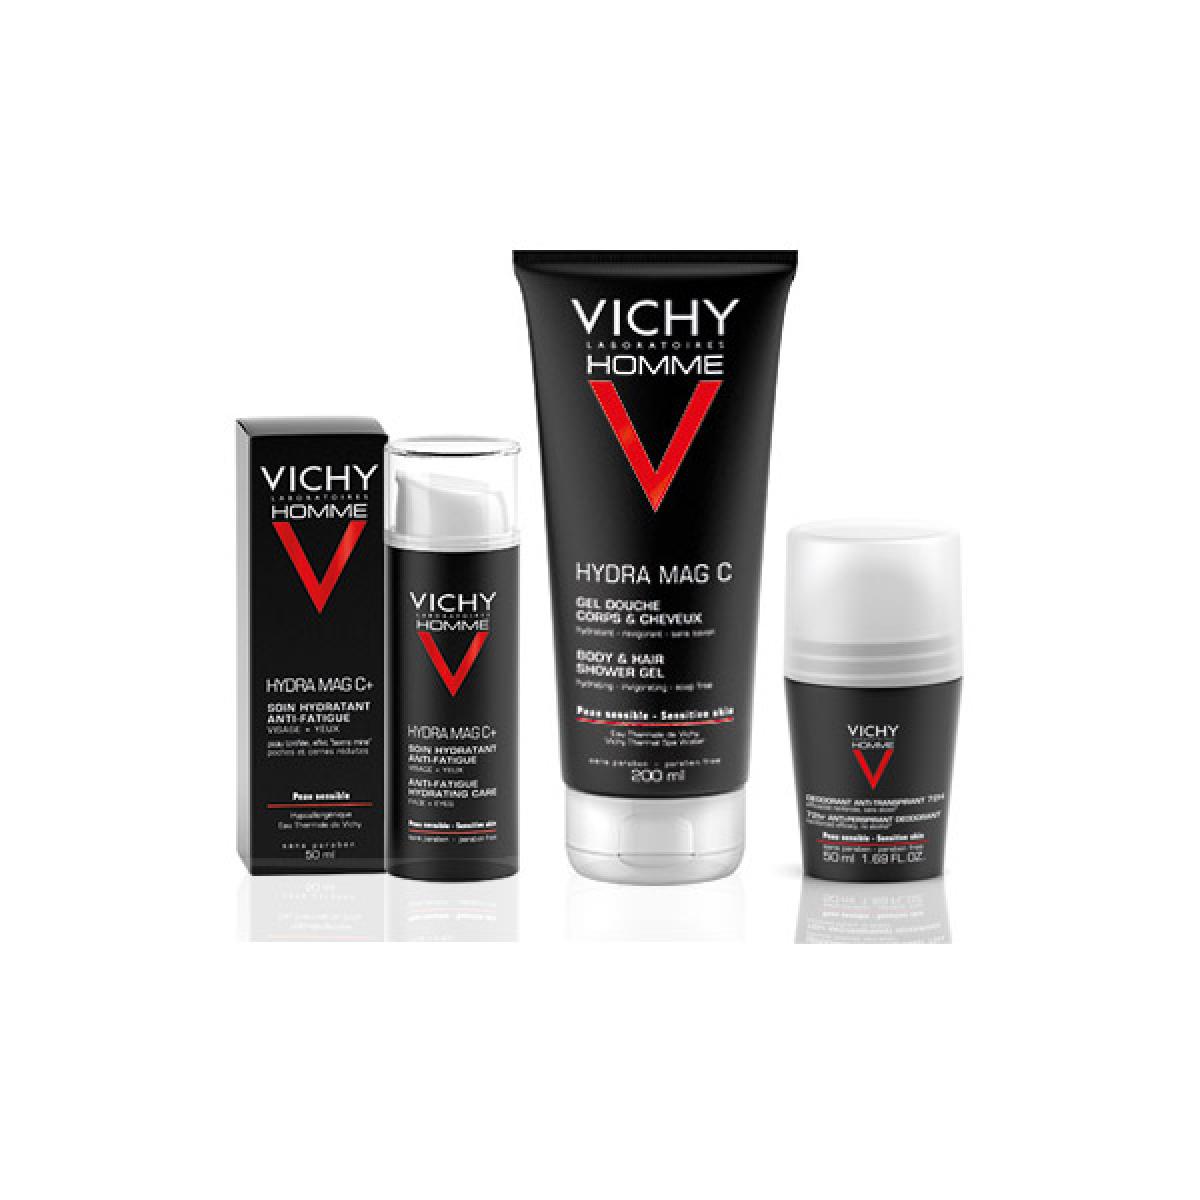 Vichy homme